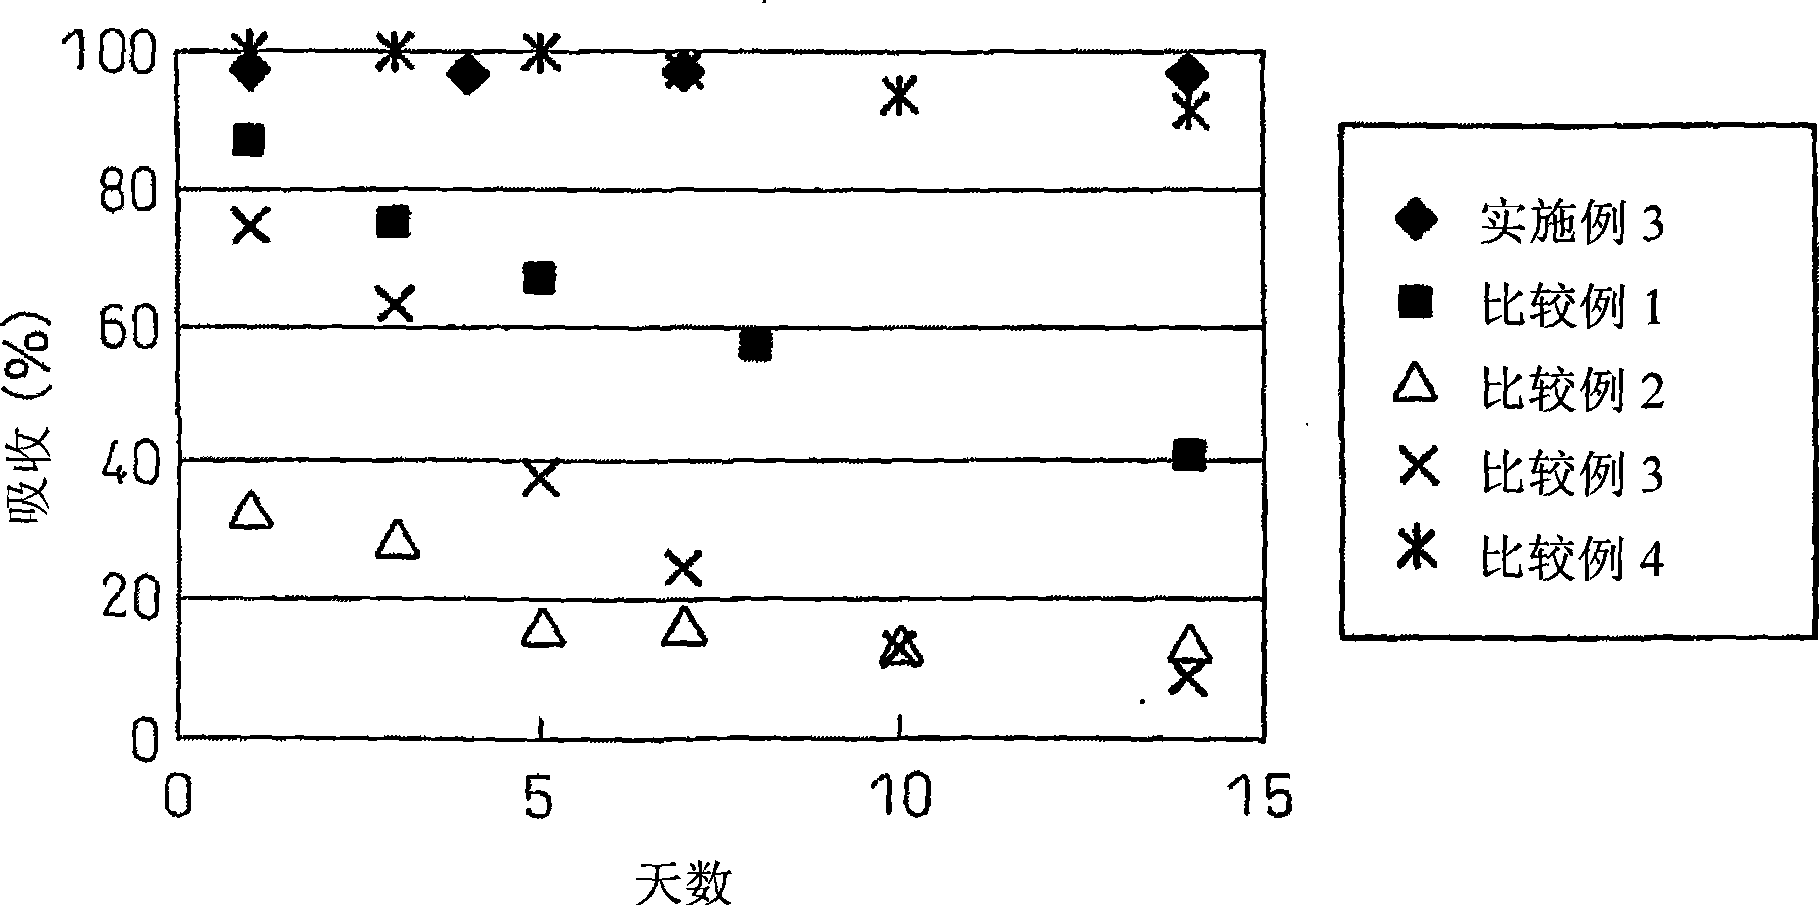 Stabilizer for hydrophobic compounds